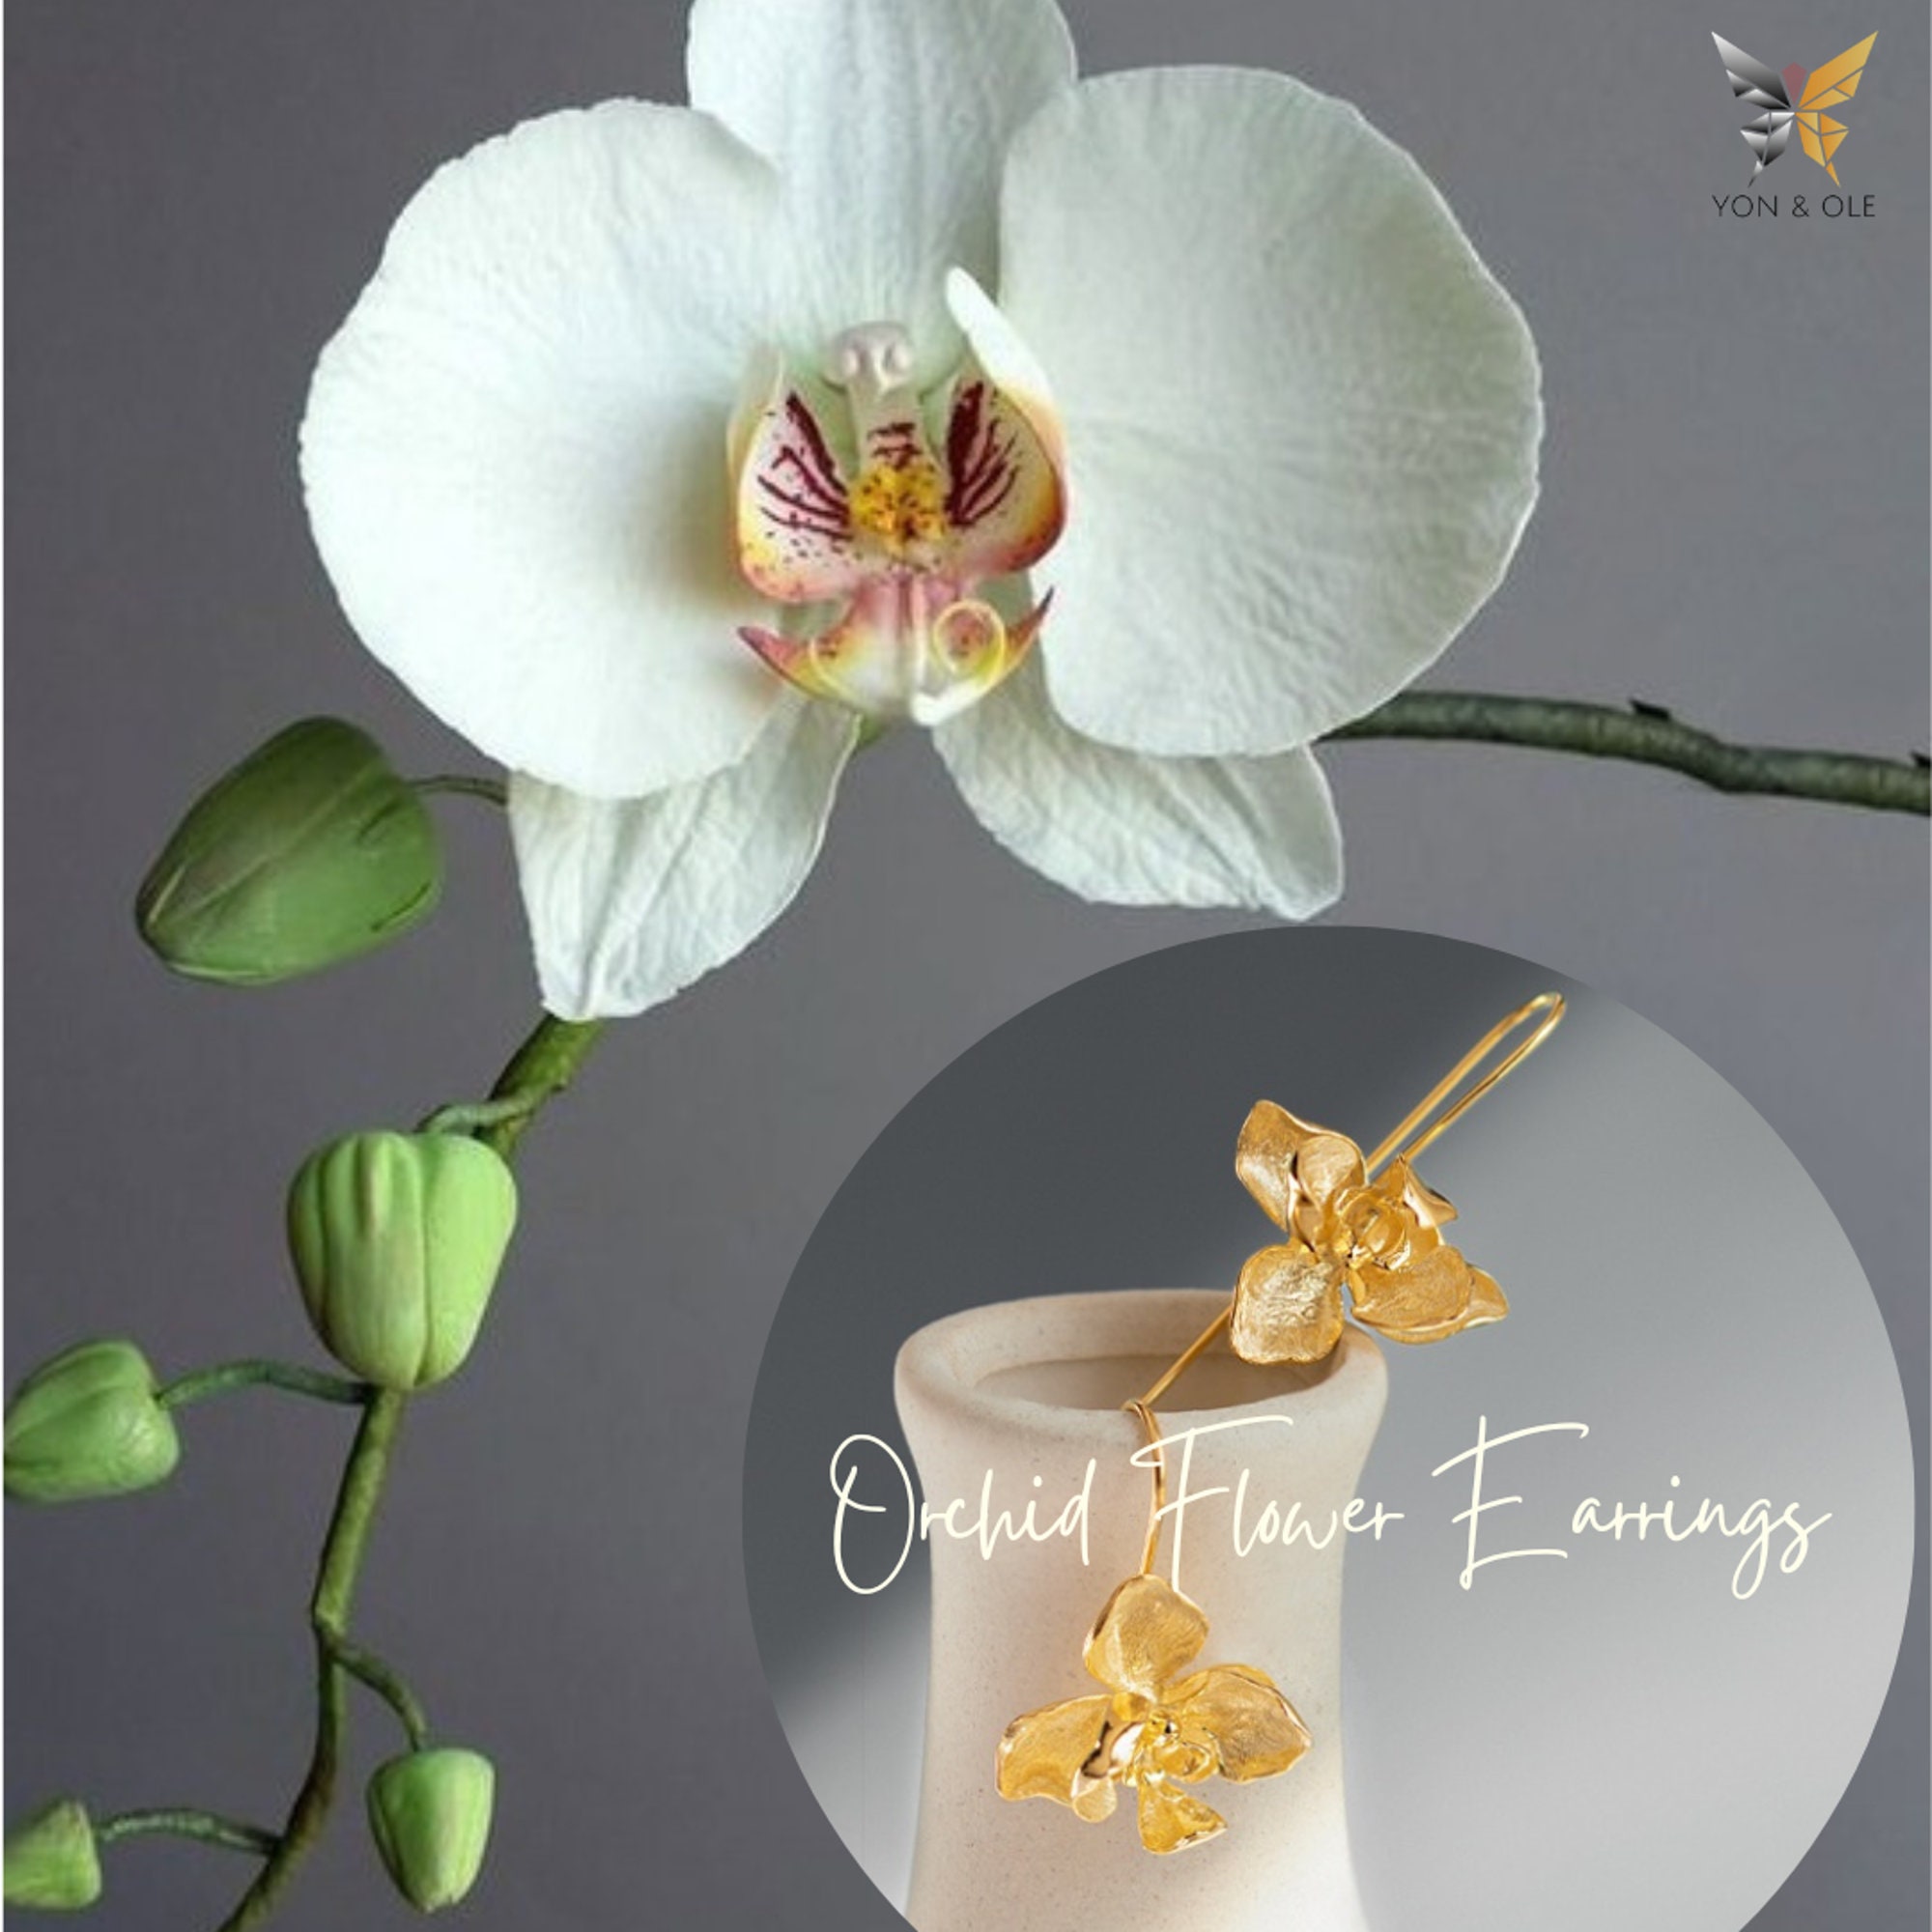 Orchid Flower STERLING Silver Earrings / Birthday Orchid Jewelry / Rose  Gold Wedding Jewelry, Bridesmaid Gifts, Bridal Gift Favor - Shop For Orchid  Flower STERLING Silver Earrings / Birthday Orchid Jewelry Online